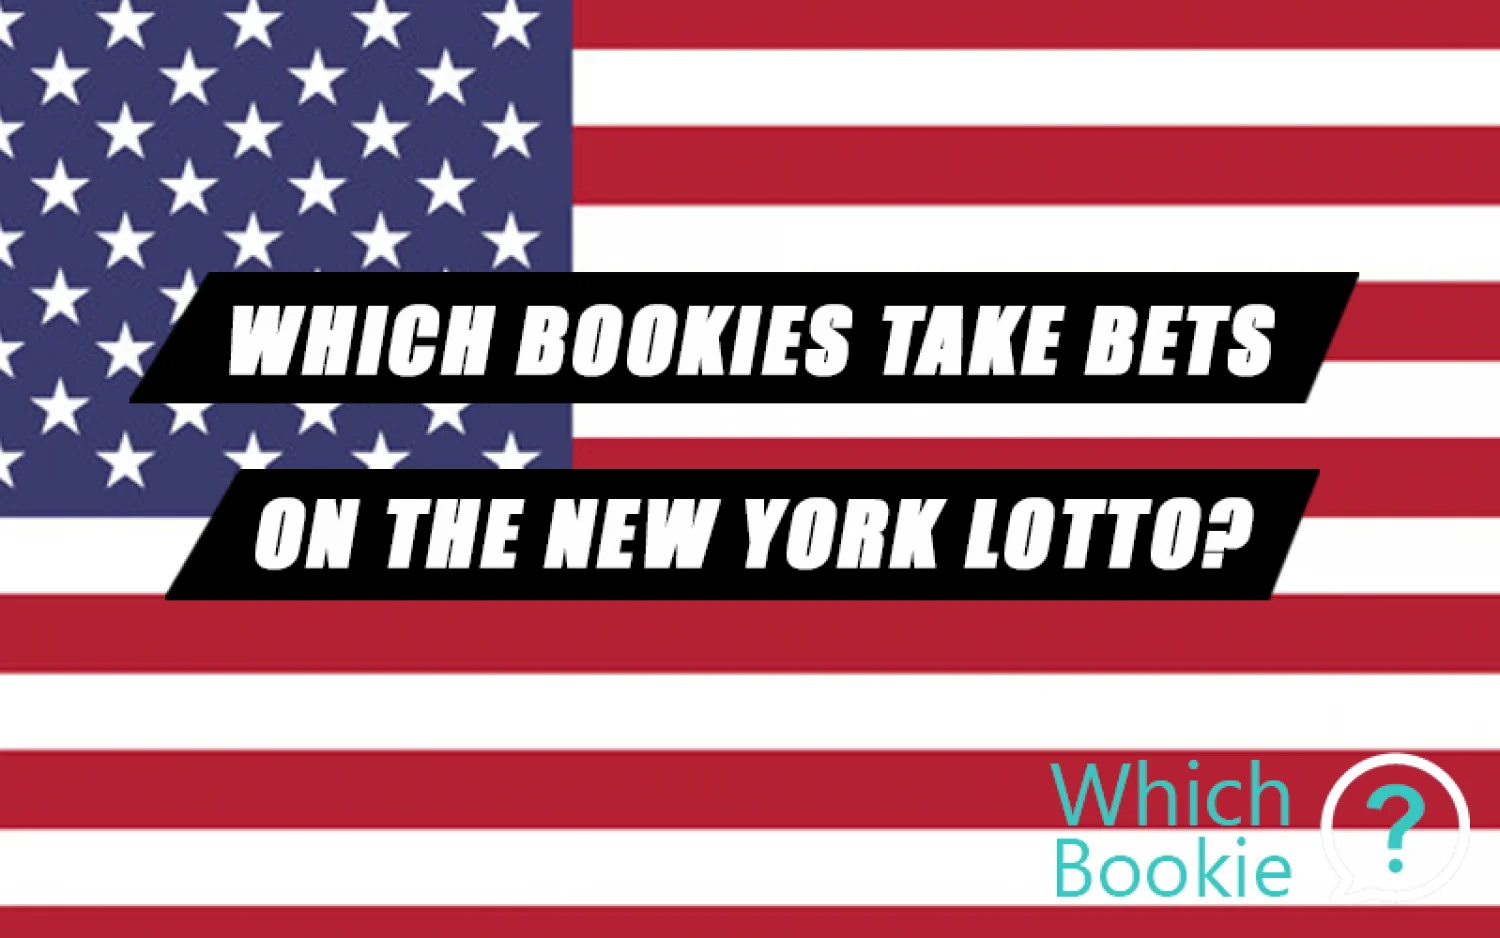 Which Bookies Do The New York Lottery? New York Lotto Bookies, Results